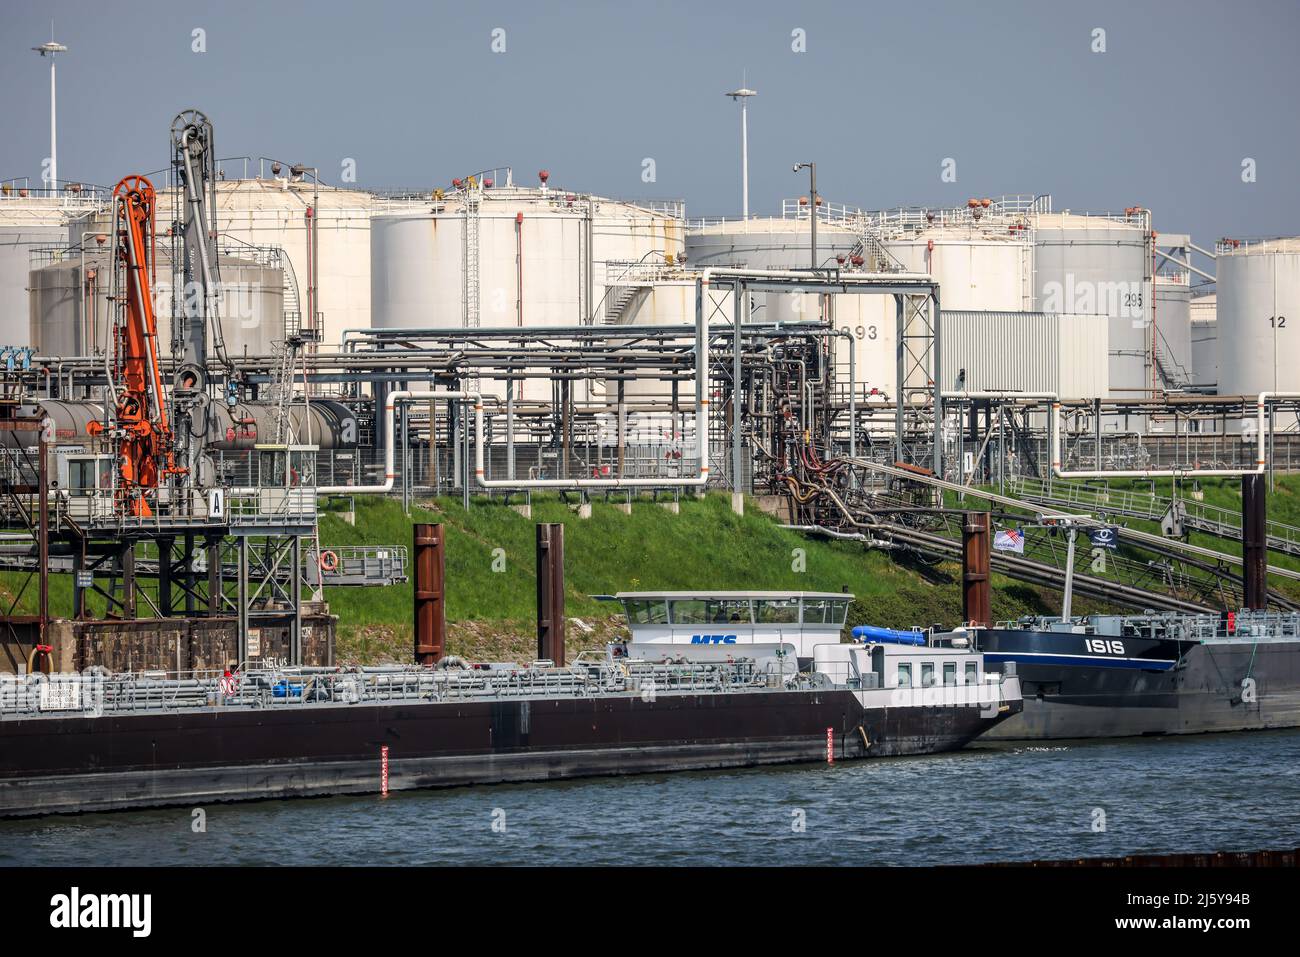 Duisburg, North Rhine-Westphalia, Germany - Duisburg Port, Duisburg Ruhrort, oil island, tankers in front of tank farm for mineral oil products, fuel Stock Photo